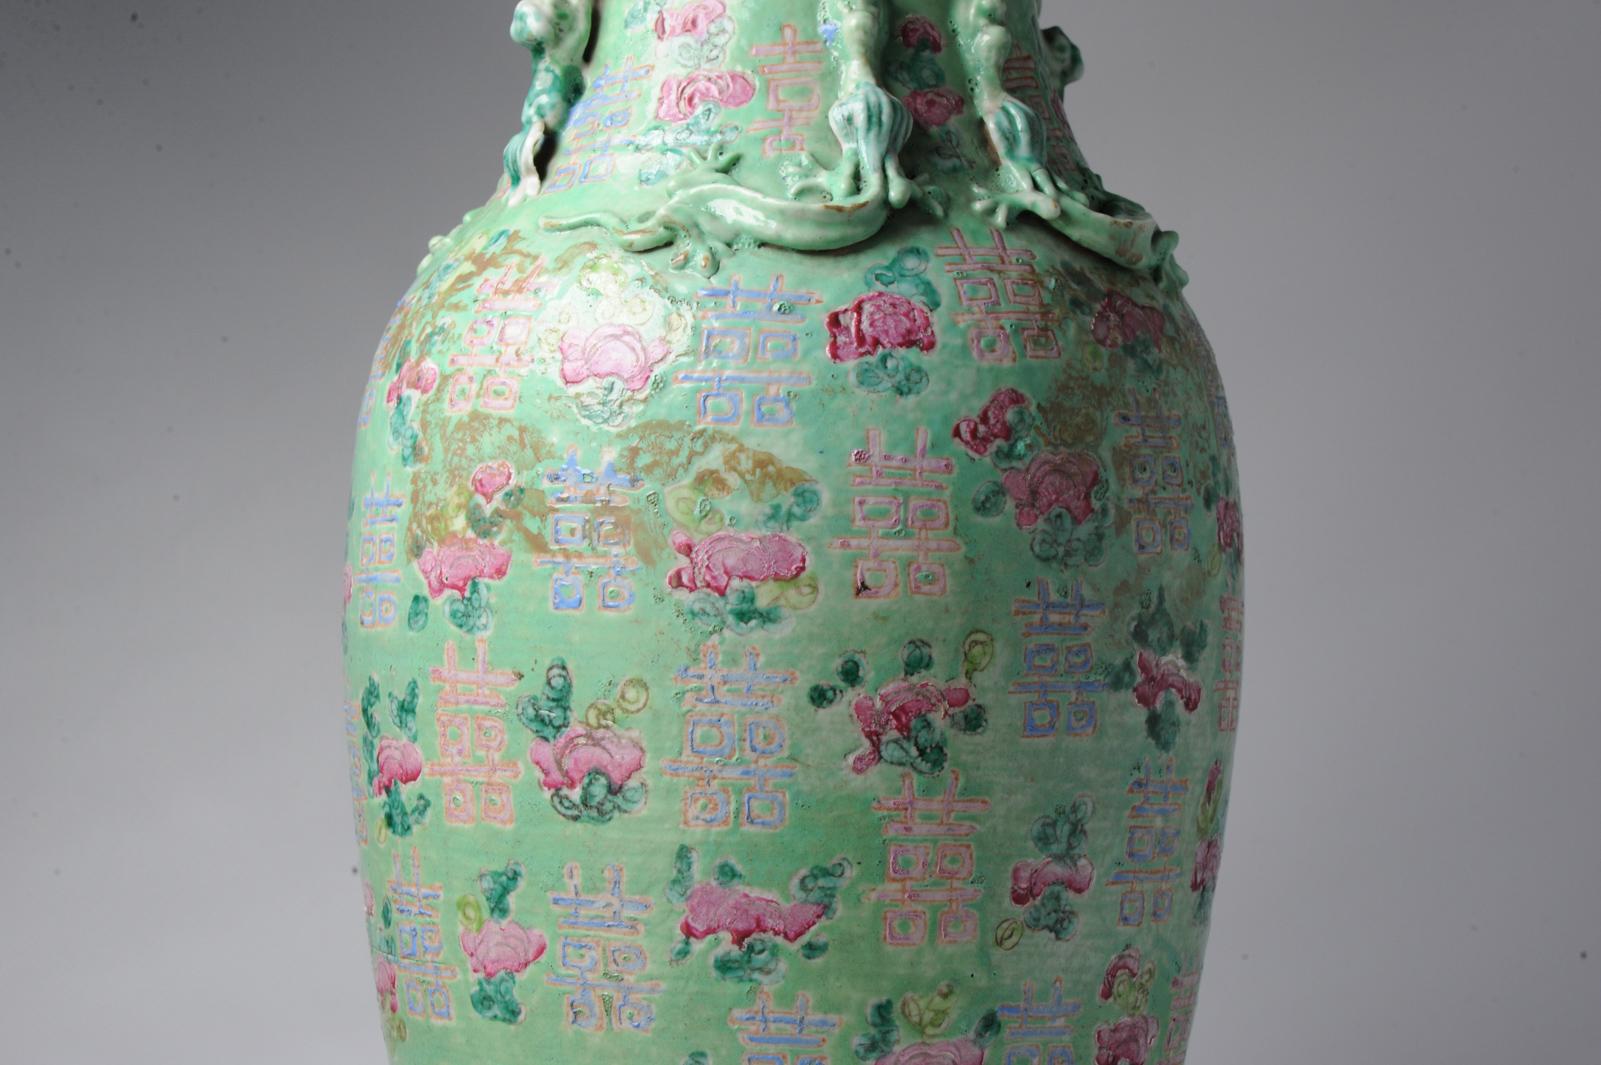 Antique Lamp Vase Chinese Porcelain Qing Period Cantonese with Ideograms For Sale 9